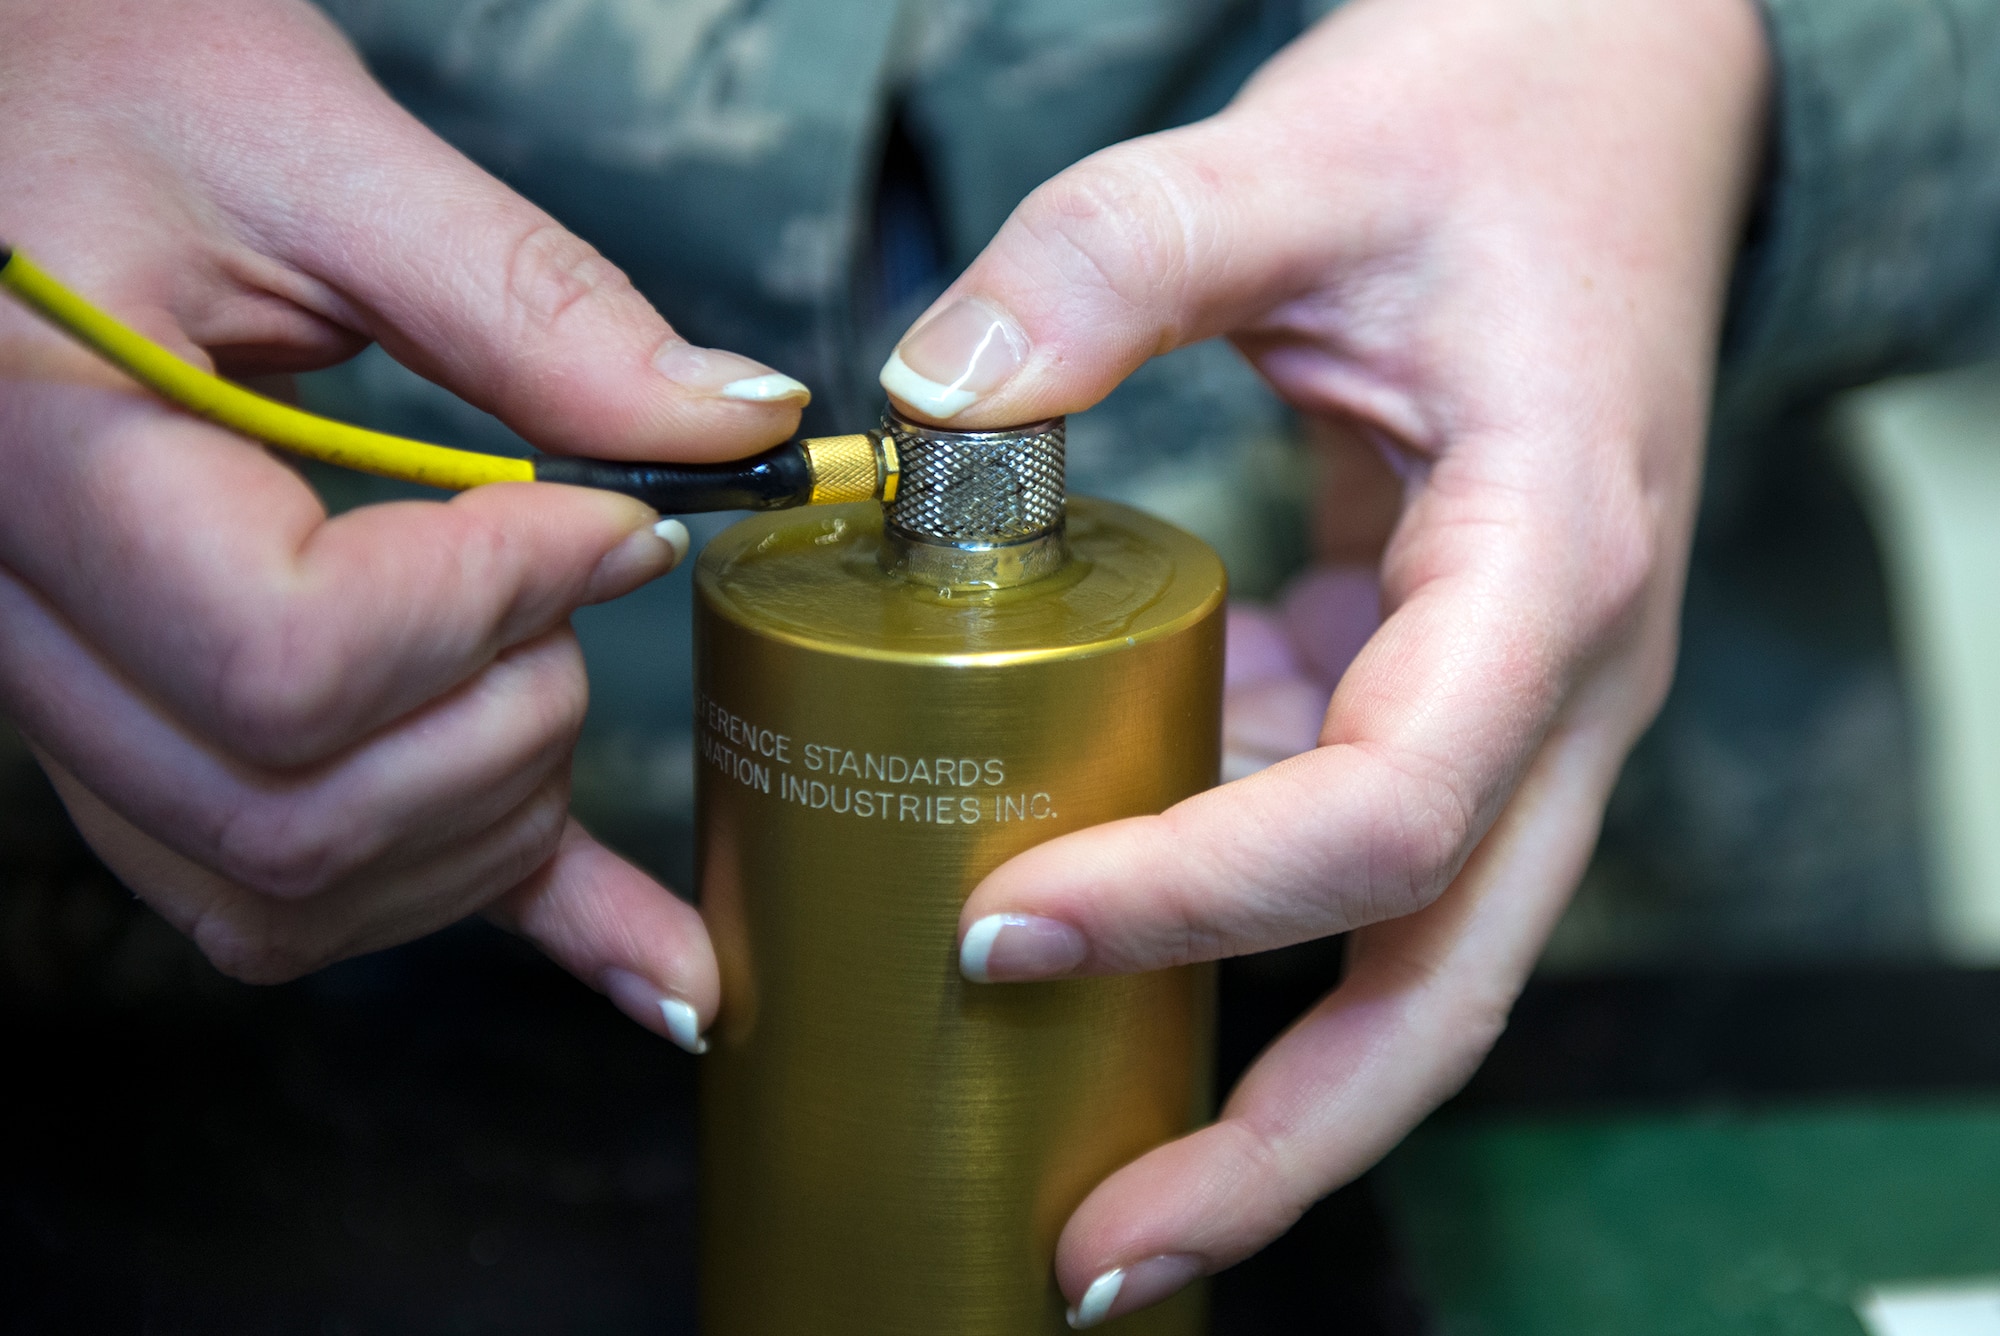 U.S. Air Force Airman 1st Class Brittany Fore, 23d Equipment Maintenance Squadron non-destructive inspection unit fabrication flight journeyman, checks for defects in a calibration block, Jan. 12, 2016, at Moody Air Force Base, Ga. Fore uses ultrasonic couplant which is designed to help the ultrasonic system listen for sound disruptions to determine if there’s a defect. (U.S. Air Force photo by Airman 1st Class Greg Nash/Released)  